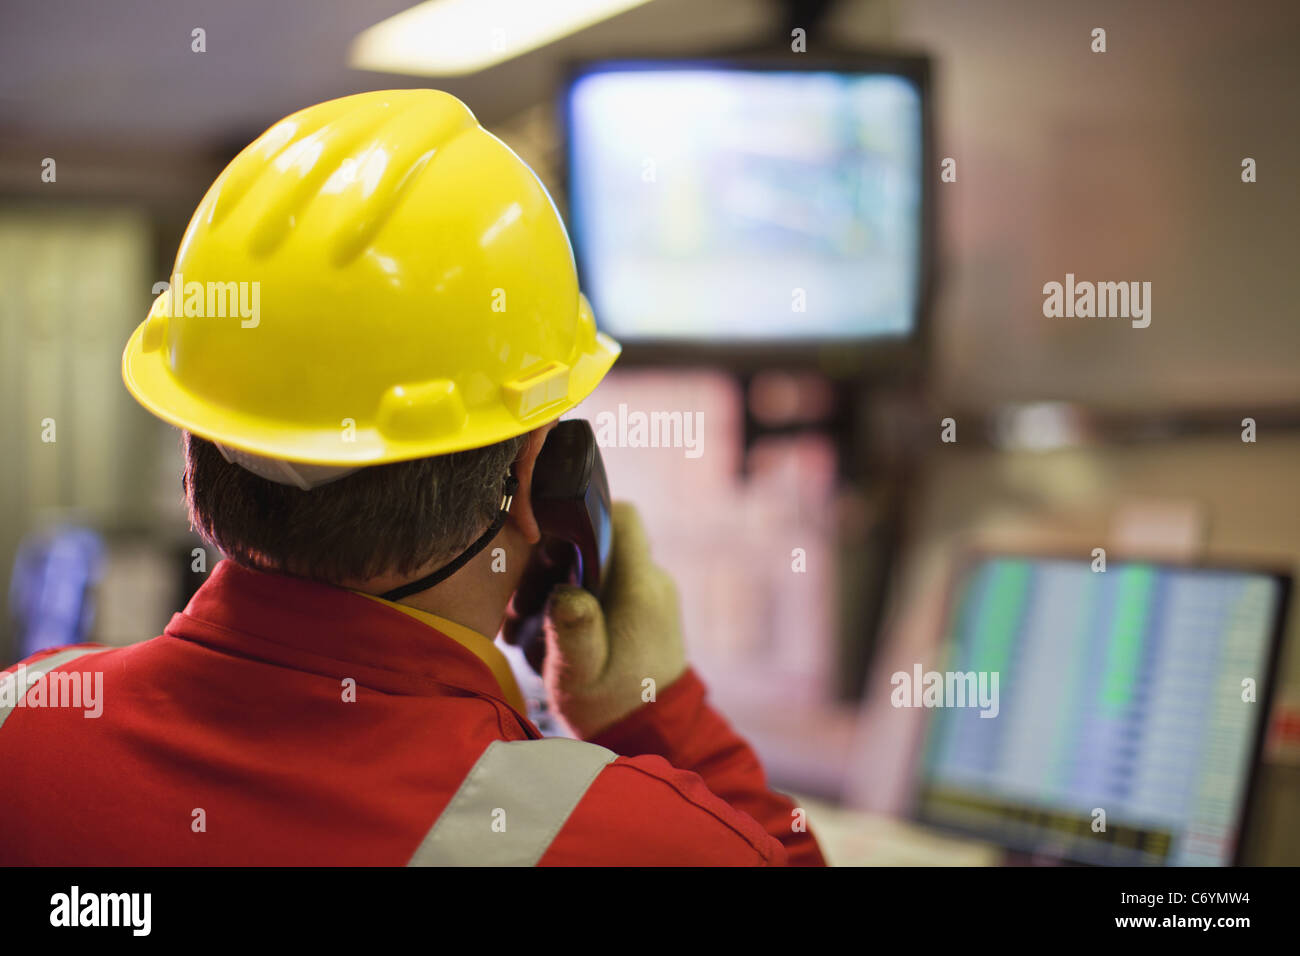 Worker watching security cameras Stock Photo